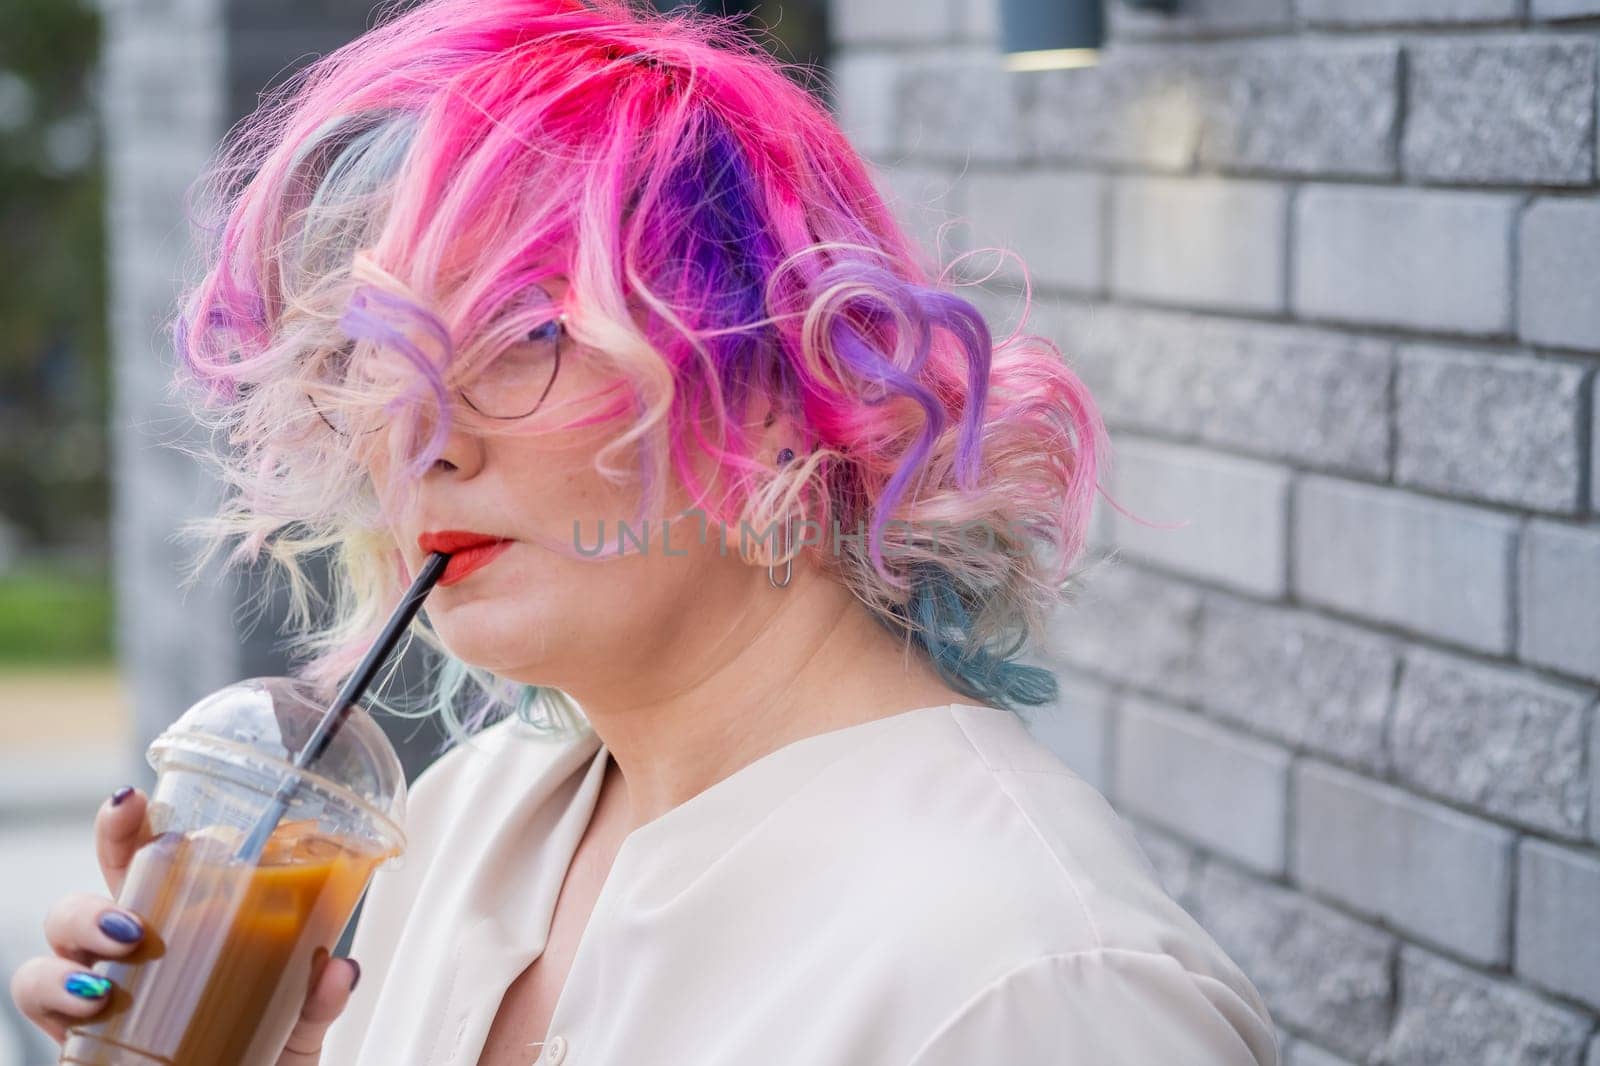 Close-up portrait of curly Caucasian woman with multi-colored hair wearing glasses. The hairstyle model is drinking a cold drink by mrwed54